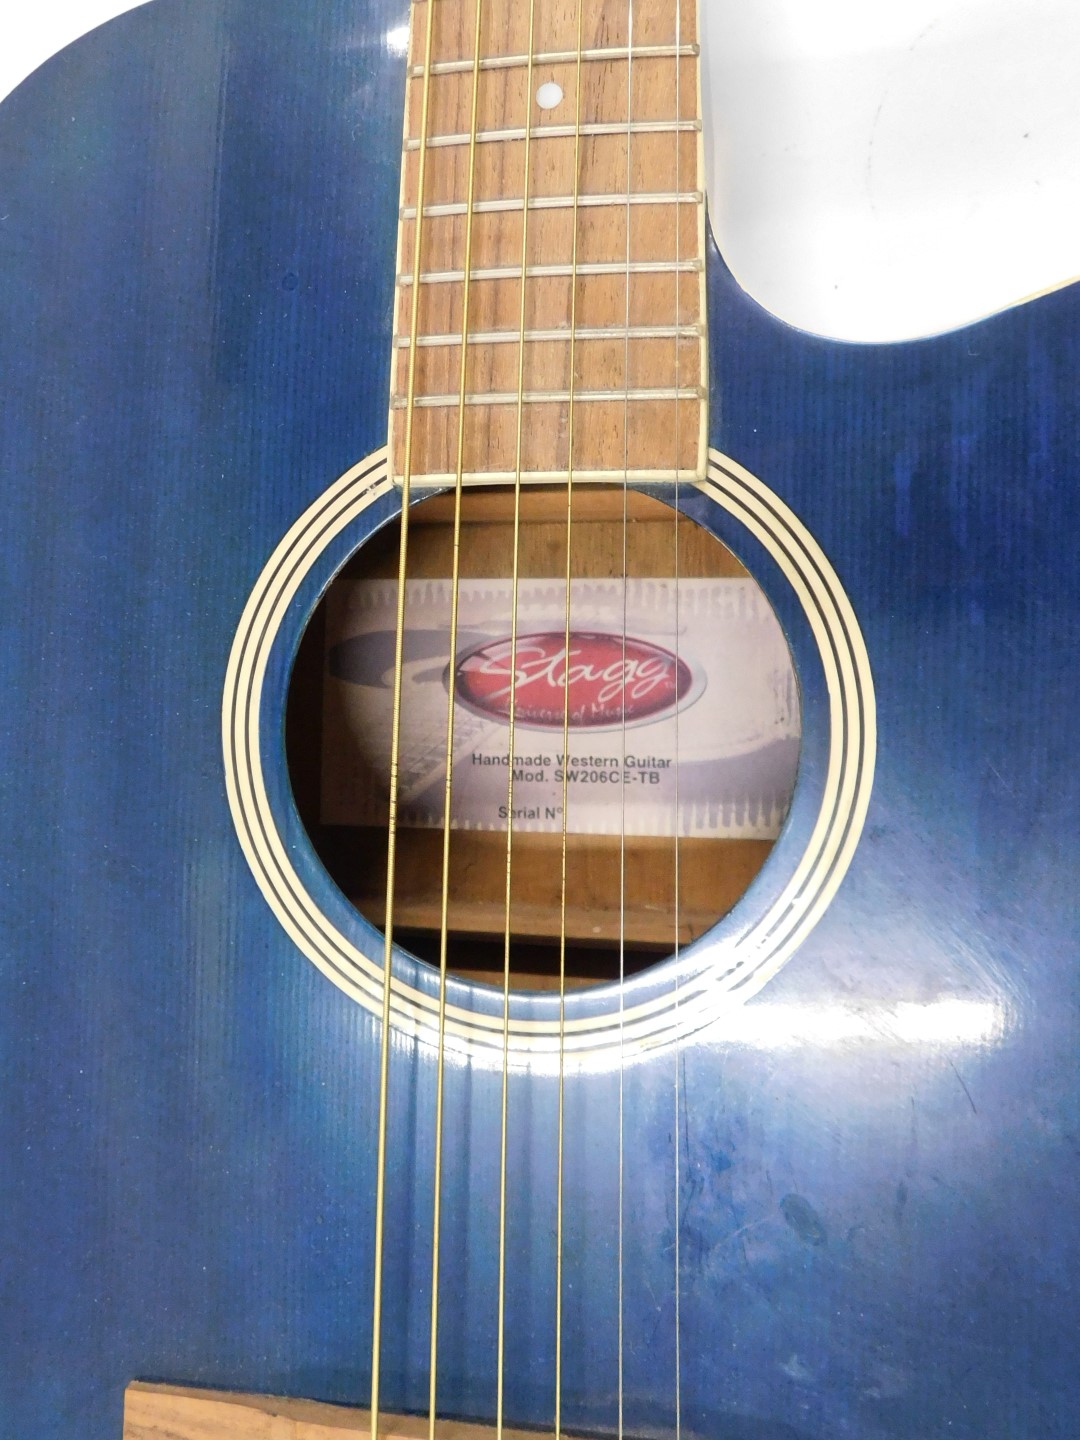 A Stagg handmade Western guitar, model number SW206CE-TB, in blue, 102cm long. - Image 5 of 7